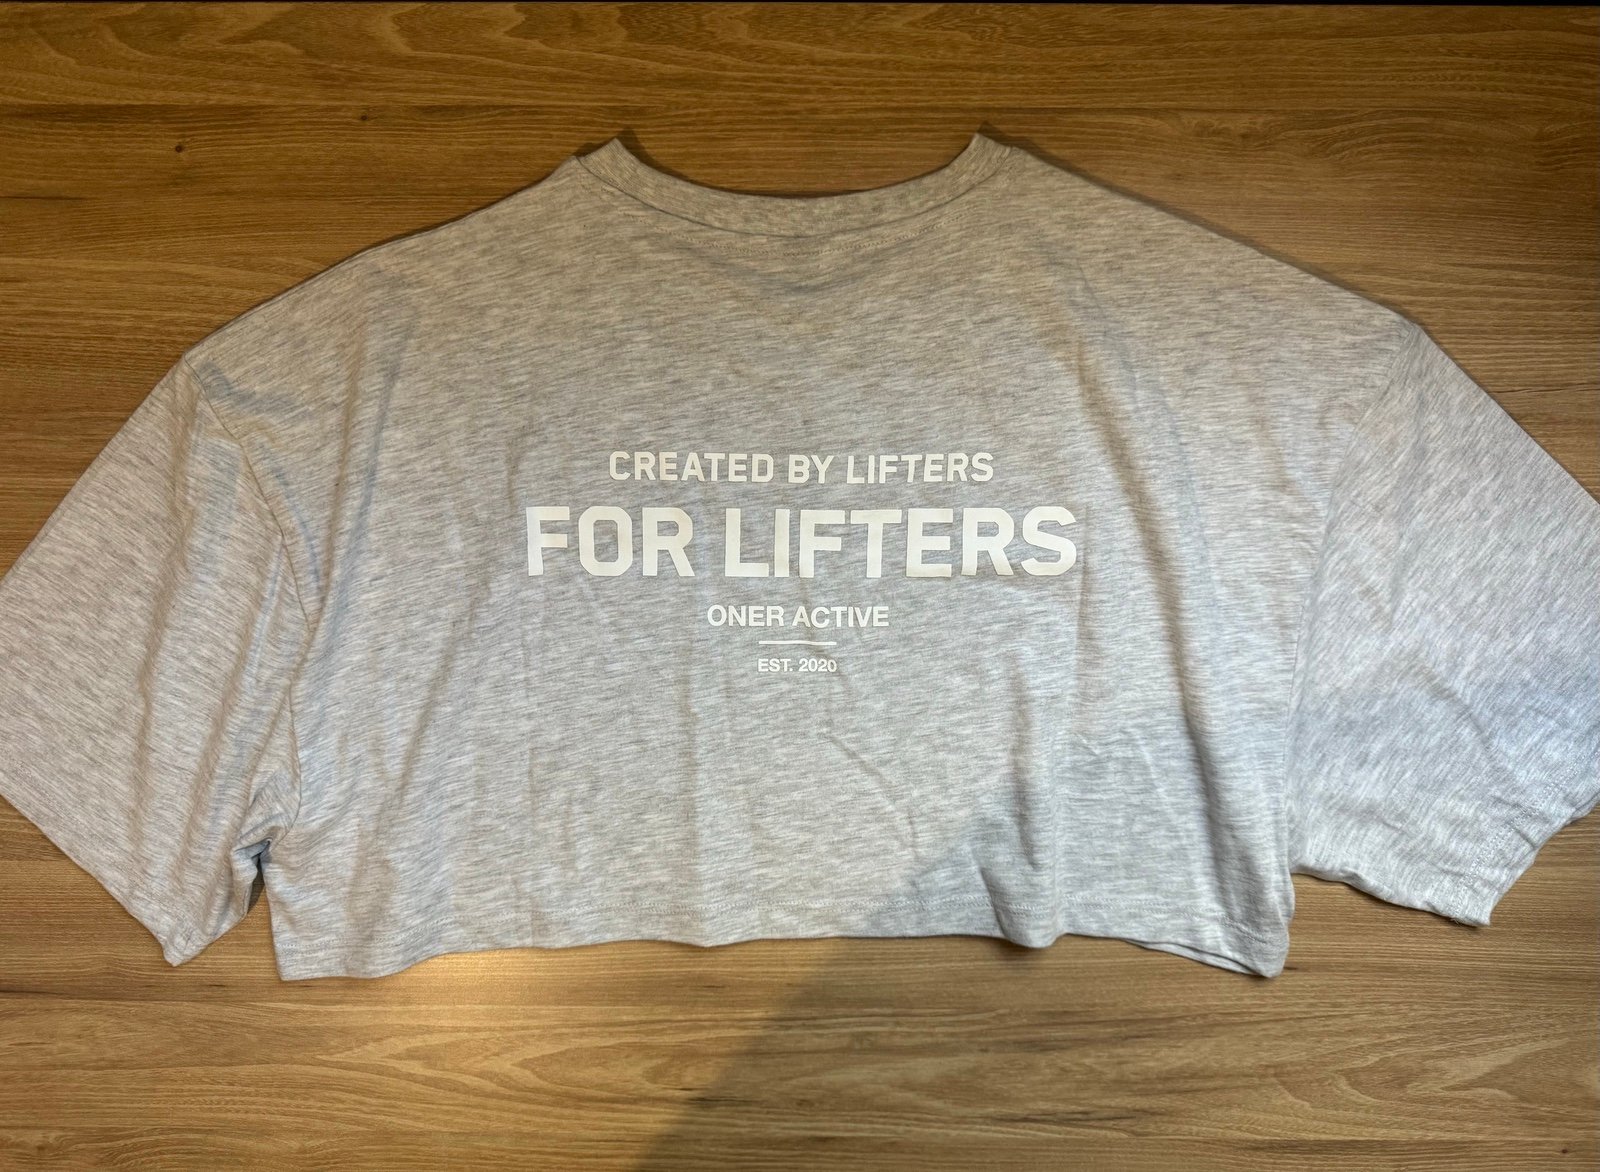 the Lowest price Oner Active Classic Lifters Graphic Relaxed Crop Lightweight T-Shirt ISp1kF68m Online Exclusive